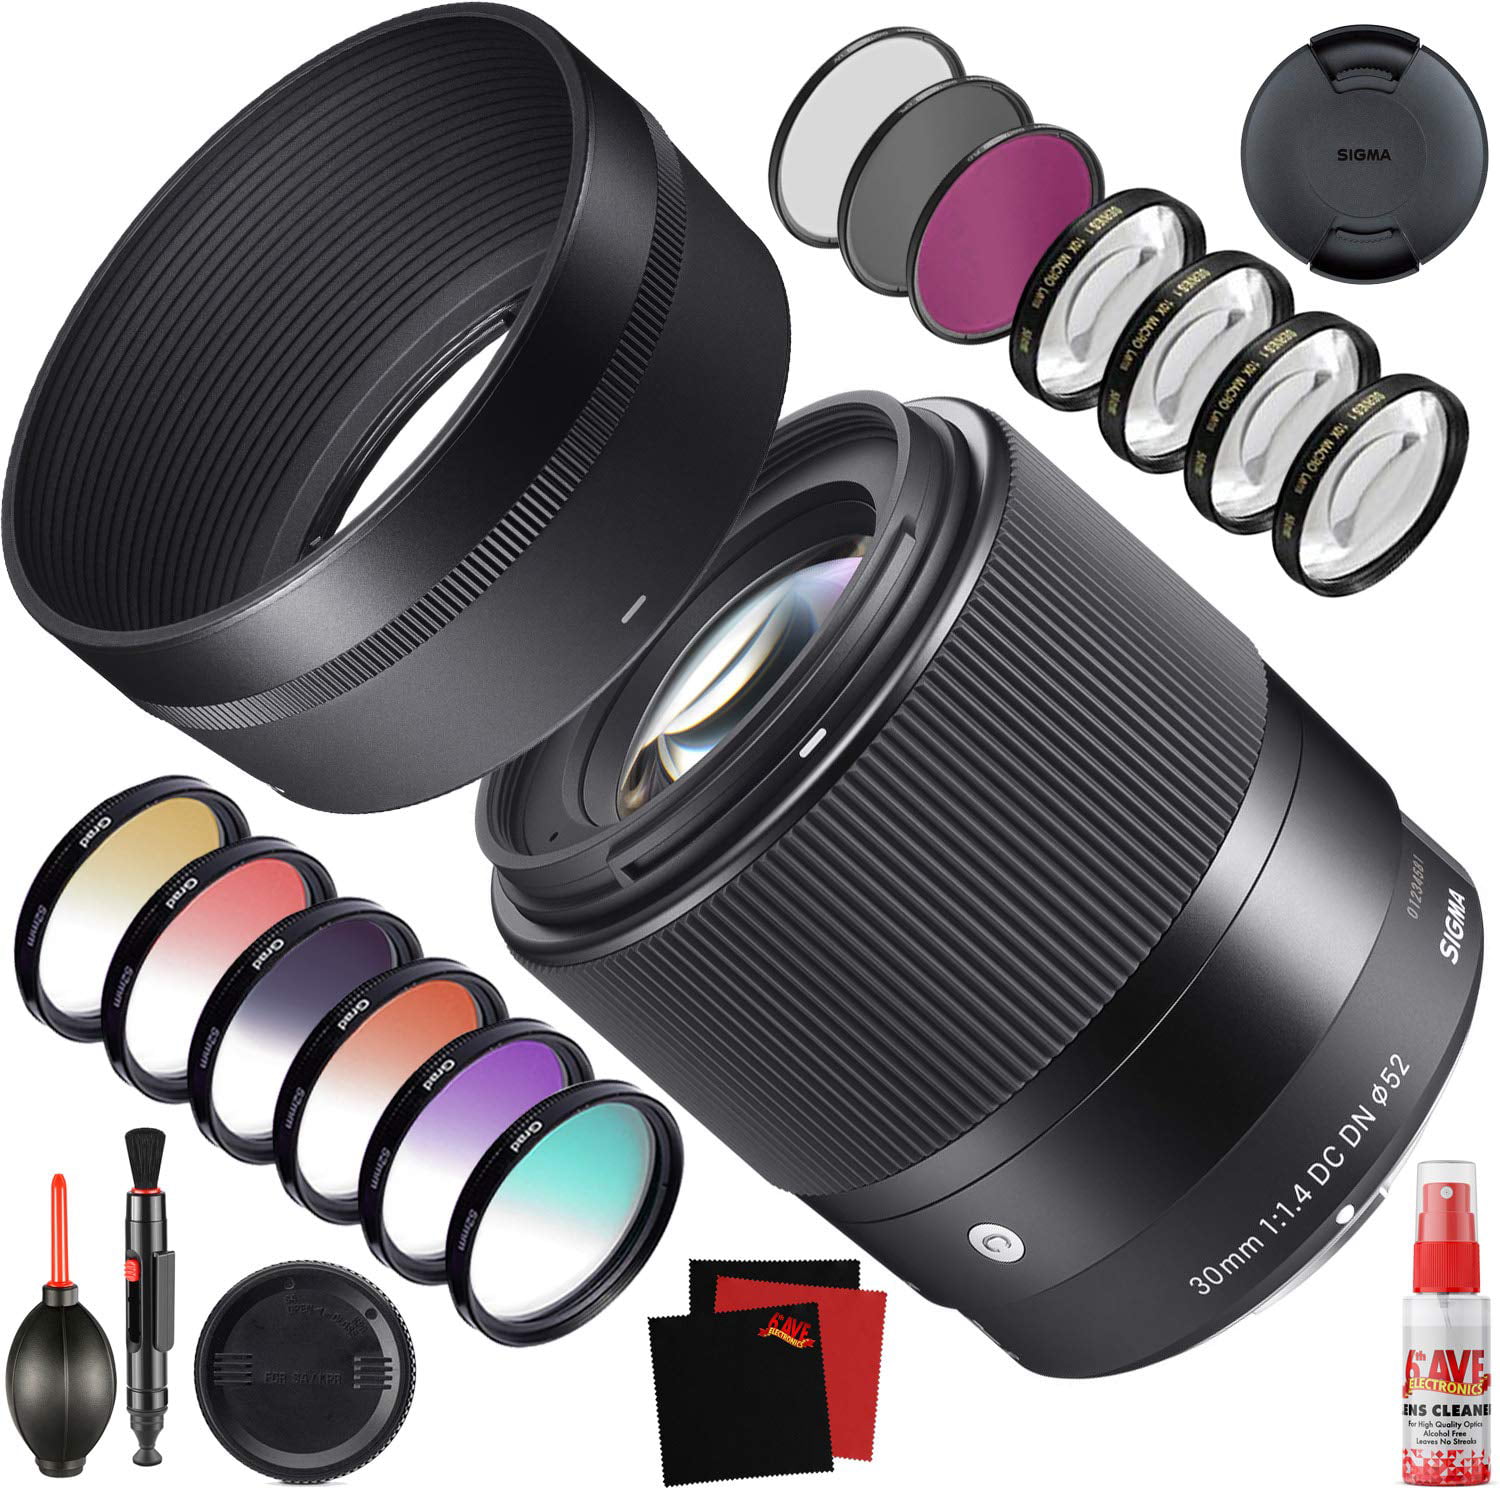  Sigma 30mm F1.4 DC DN Contemporary Lens for Sony E-Mount  Mirrorless Cameras 302965 Bundle w/Deco Gear Photography Accessory Kit +  52mm UV Polarizer FLD Filter Set + Photo Video Editing